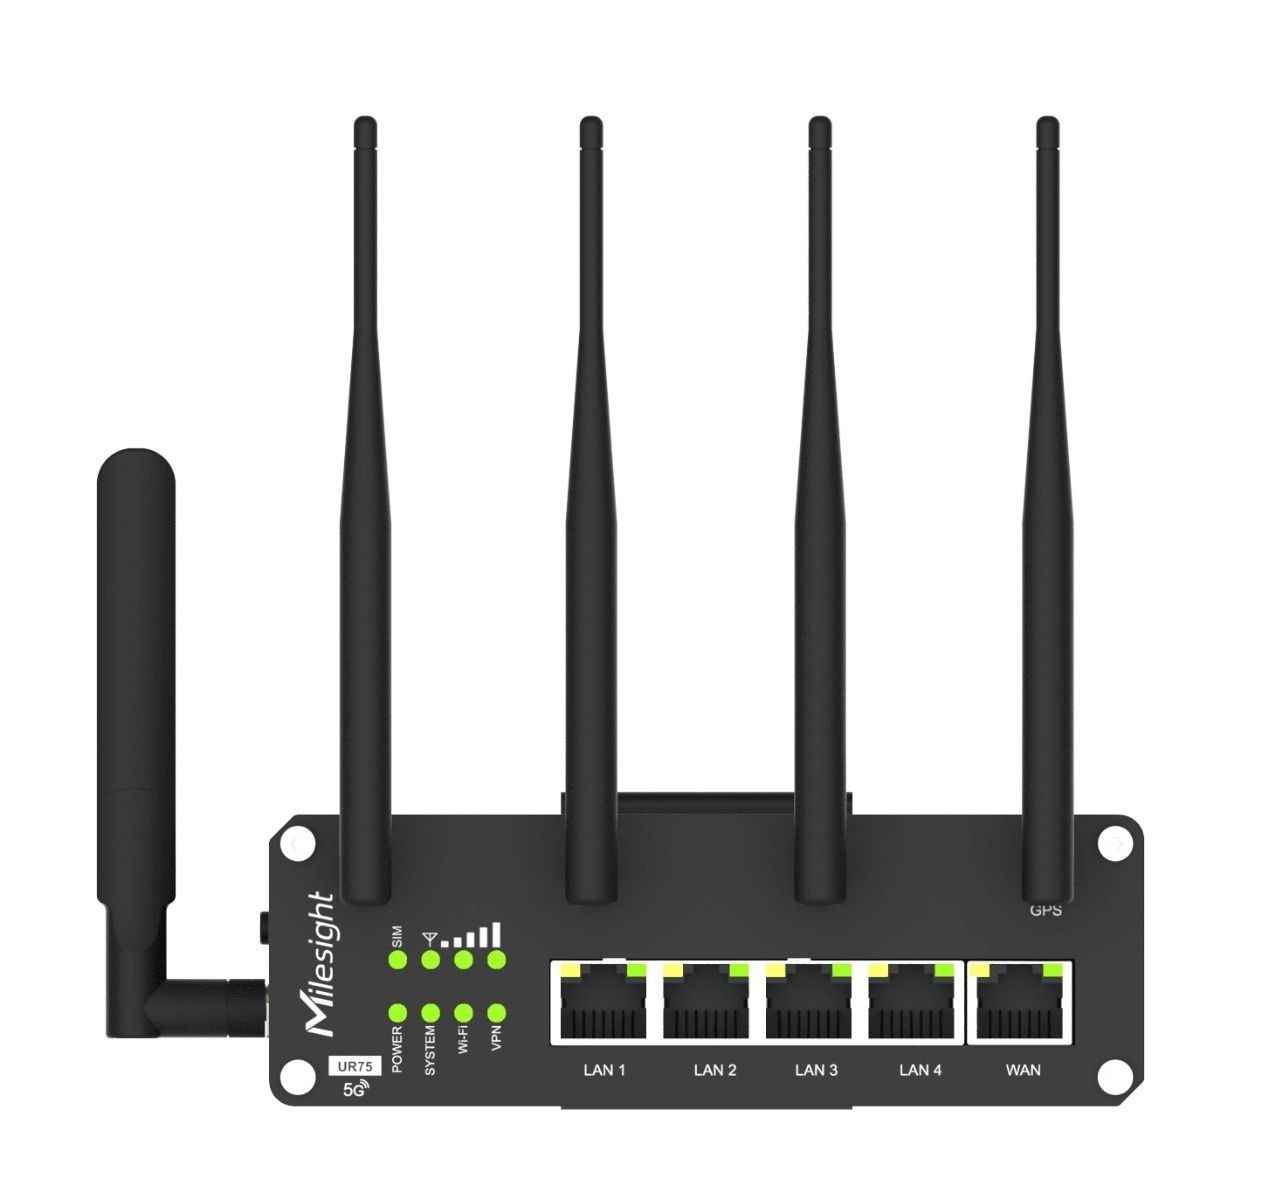 Milesight 5G Router, Dual Sim, 5x GbE PoE Ports, Wi-Fi, GPS, RS232/RS485